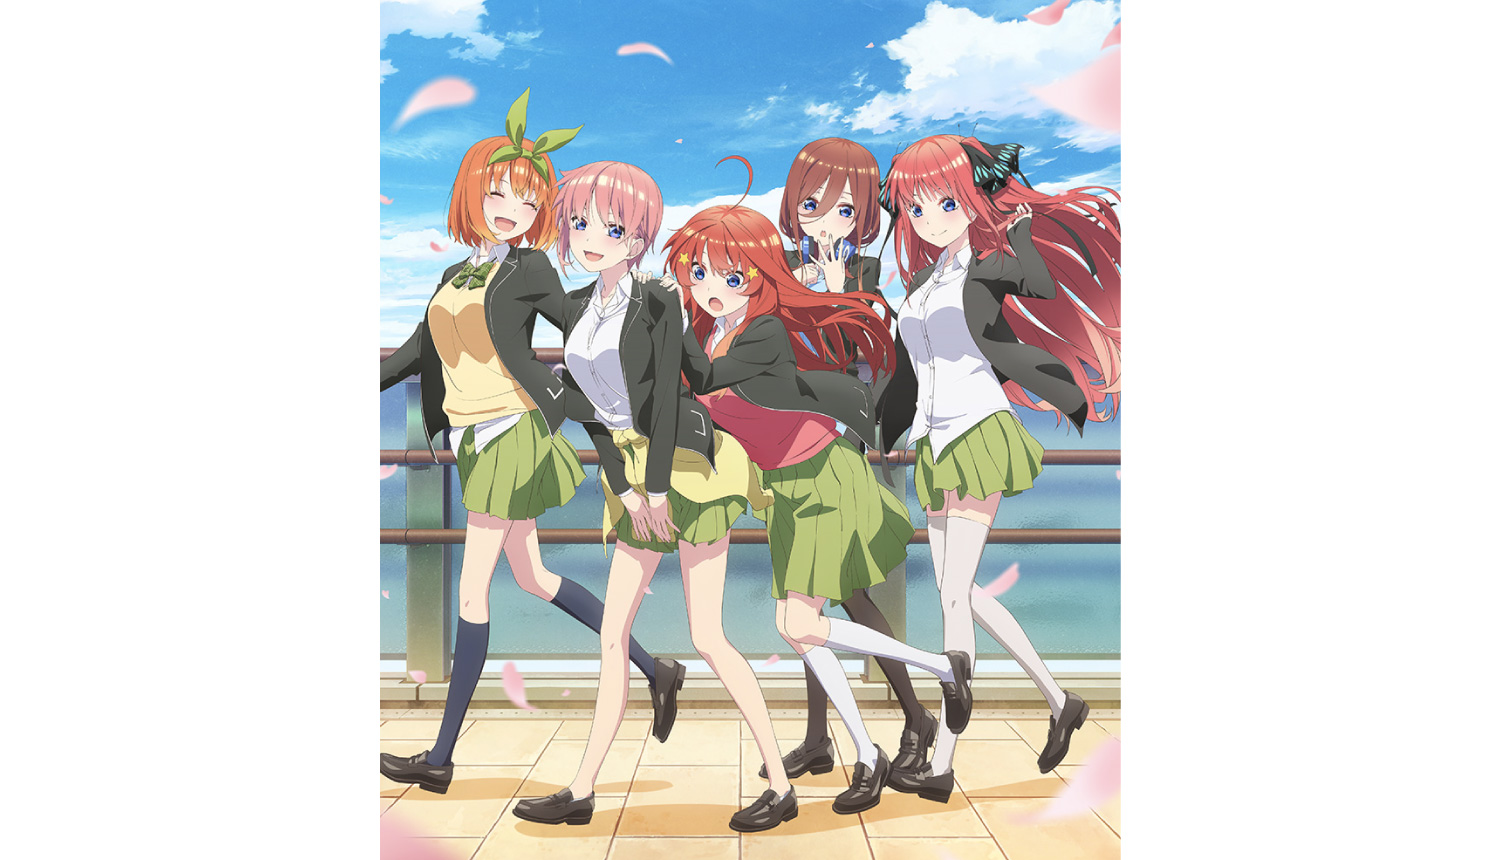 It's official, The Quintessential Quintuplets Season 2 will begin airing in  October 2020! The anime will be made by a different studio this…